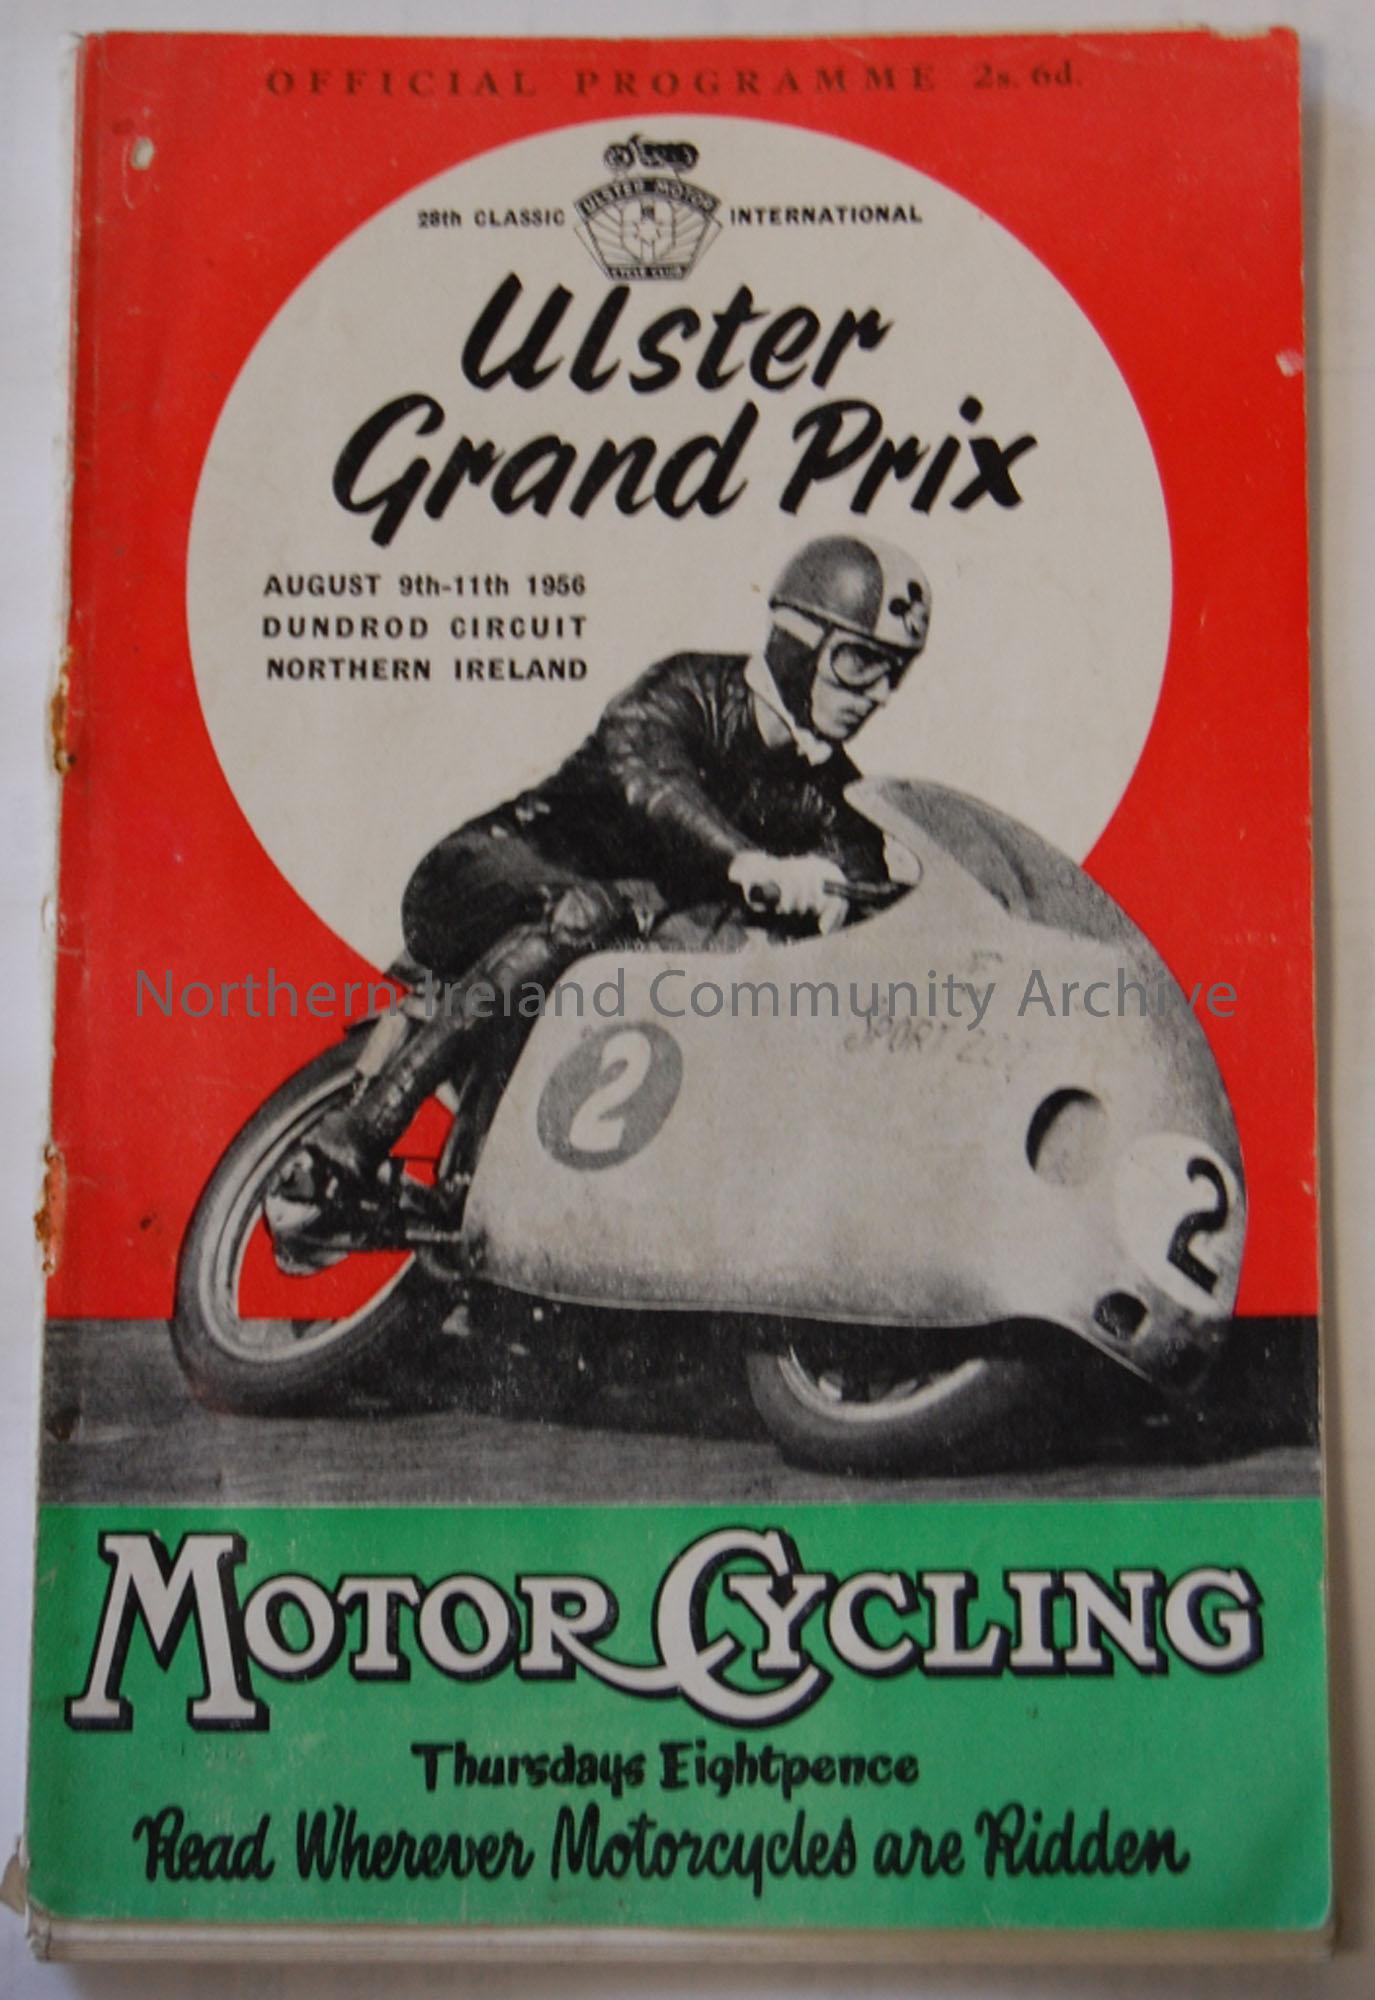 Official Souvenir programme- 28th Classic International Ulster Grand Prix 9th-11th August, 1956